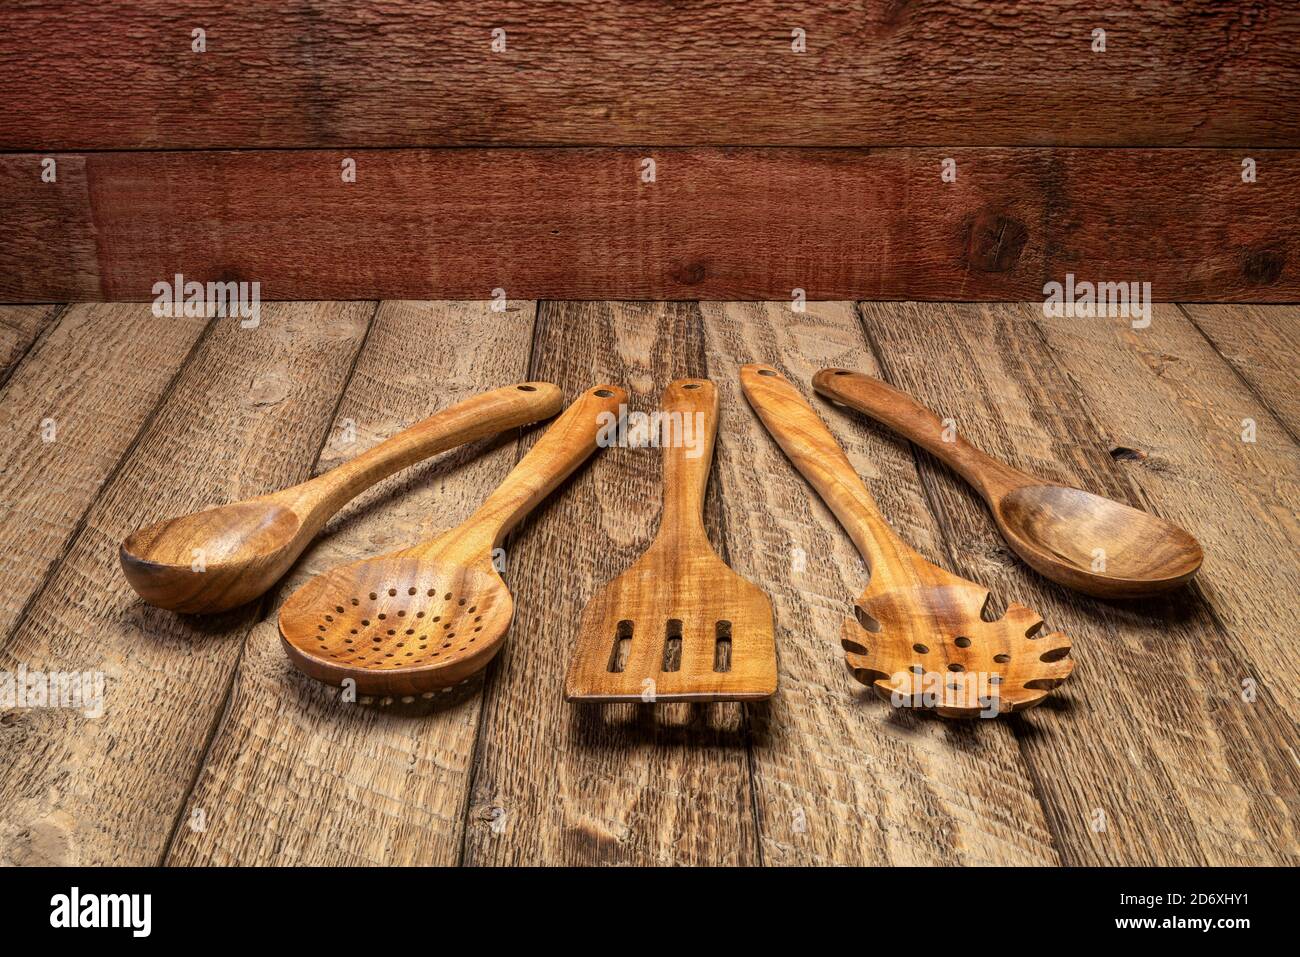 wooden kitchen cooking utensils set on a rustic weathered barn wood background Stock Photo